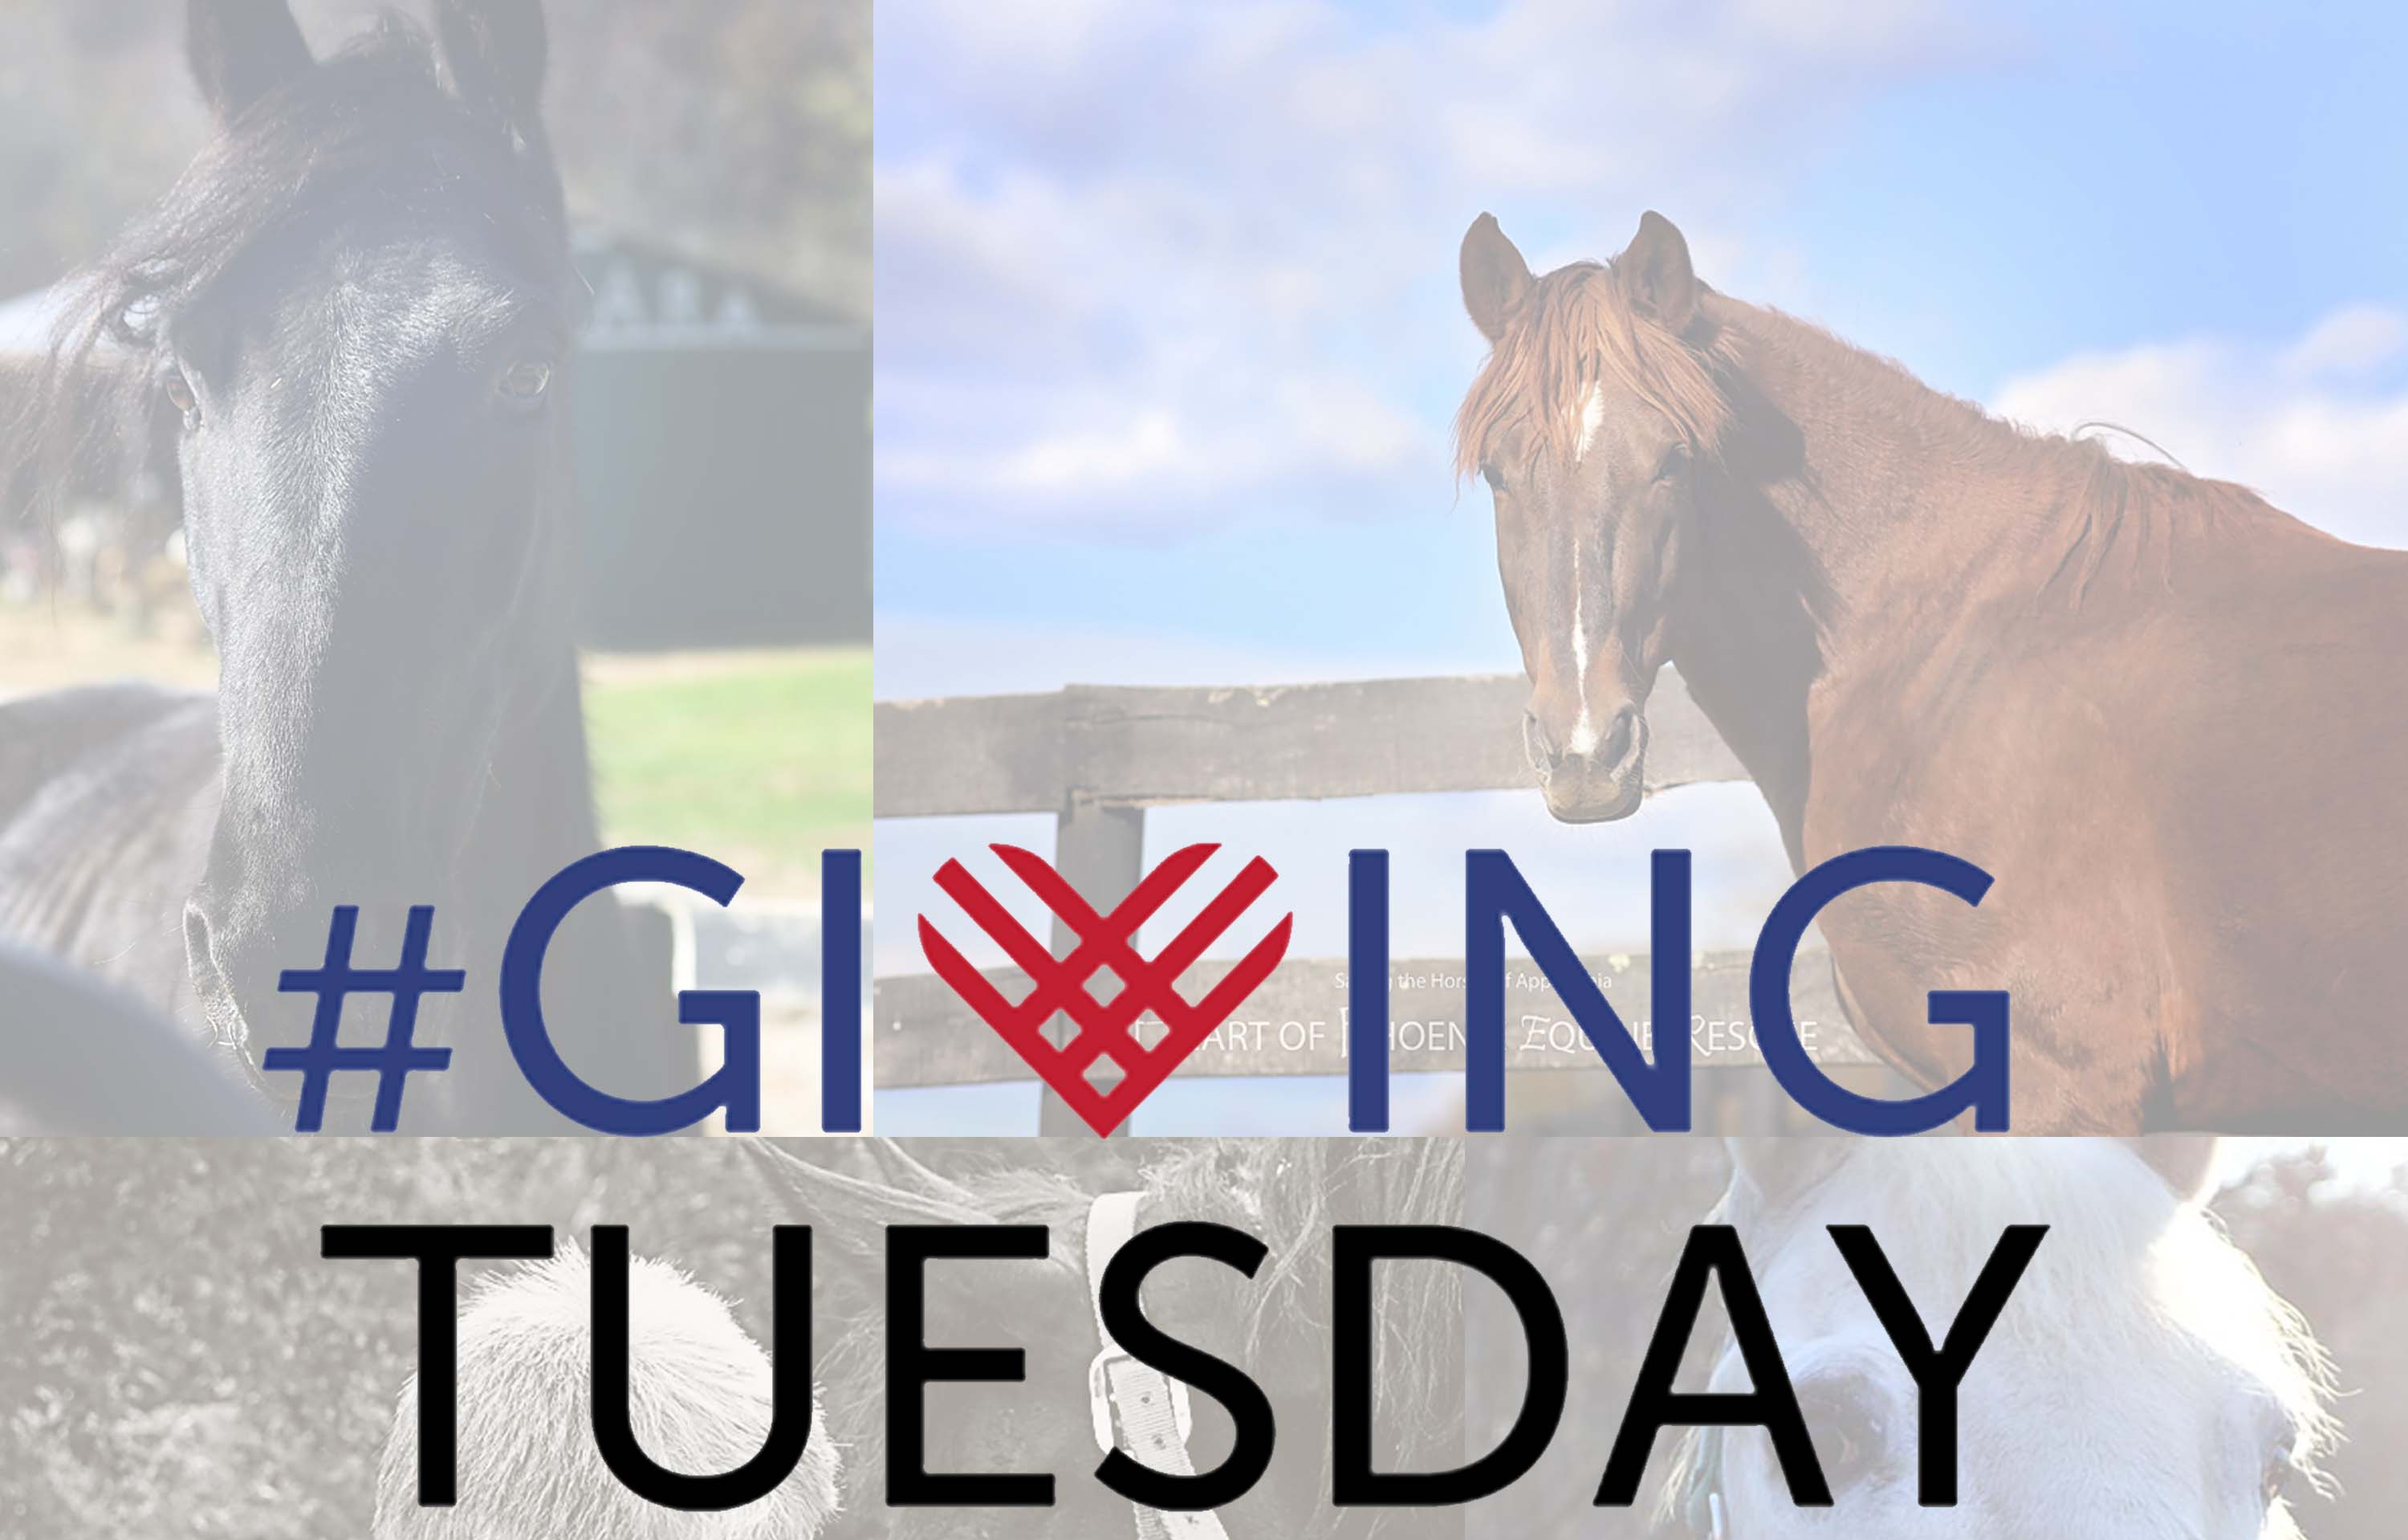 Get a Gift when you give on #GivingTuesday and your gift will be matched!